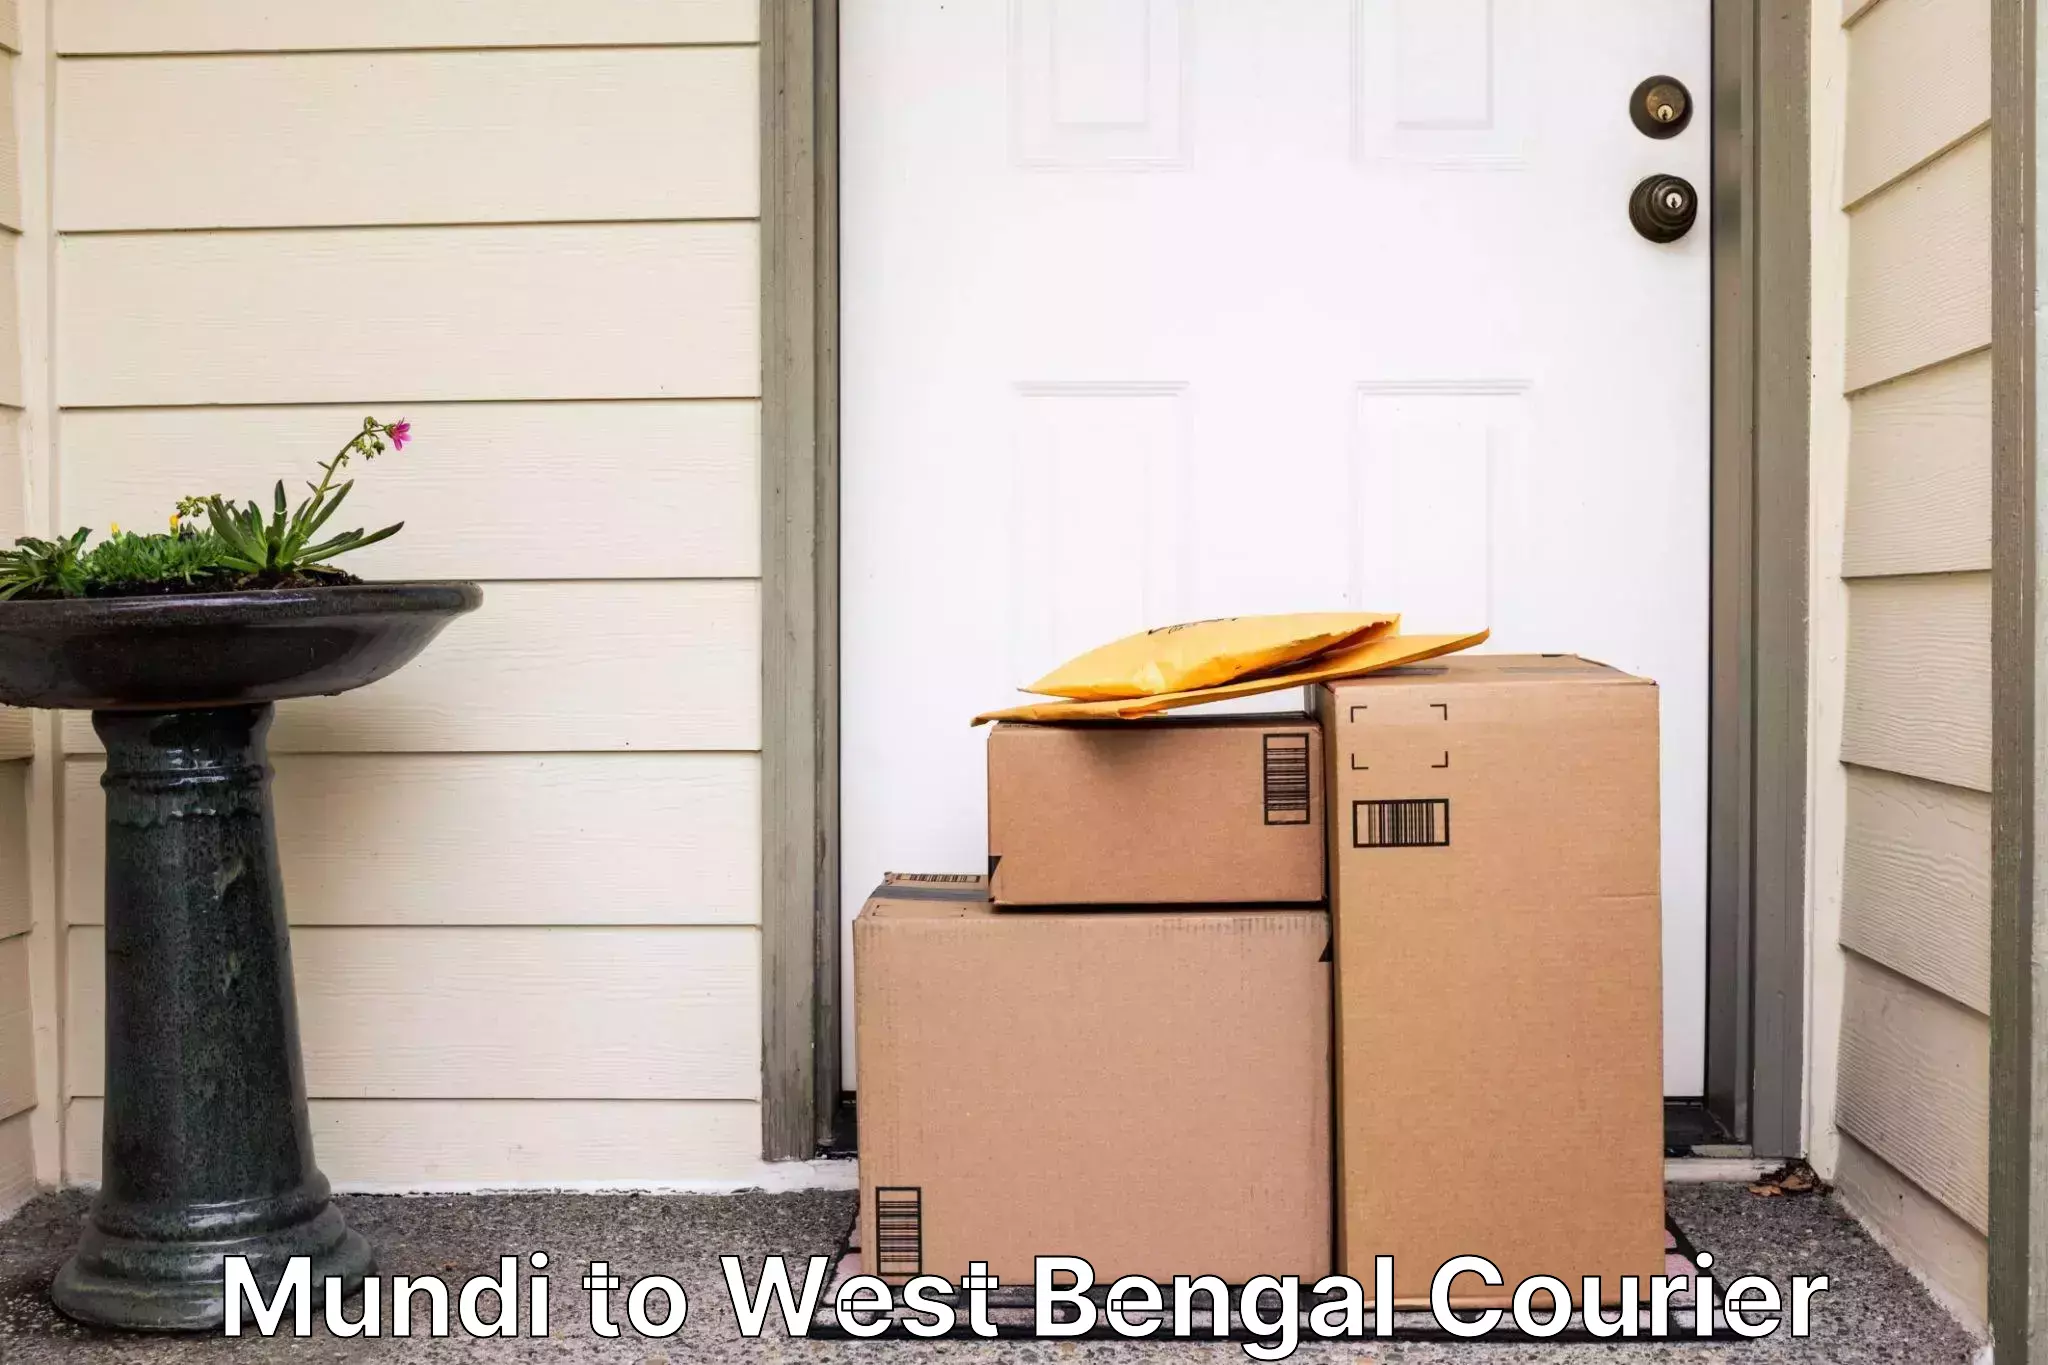 Cash on delivery service Mundi to West Bengal